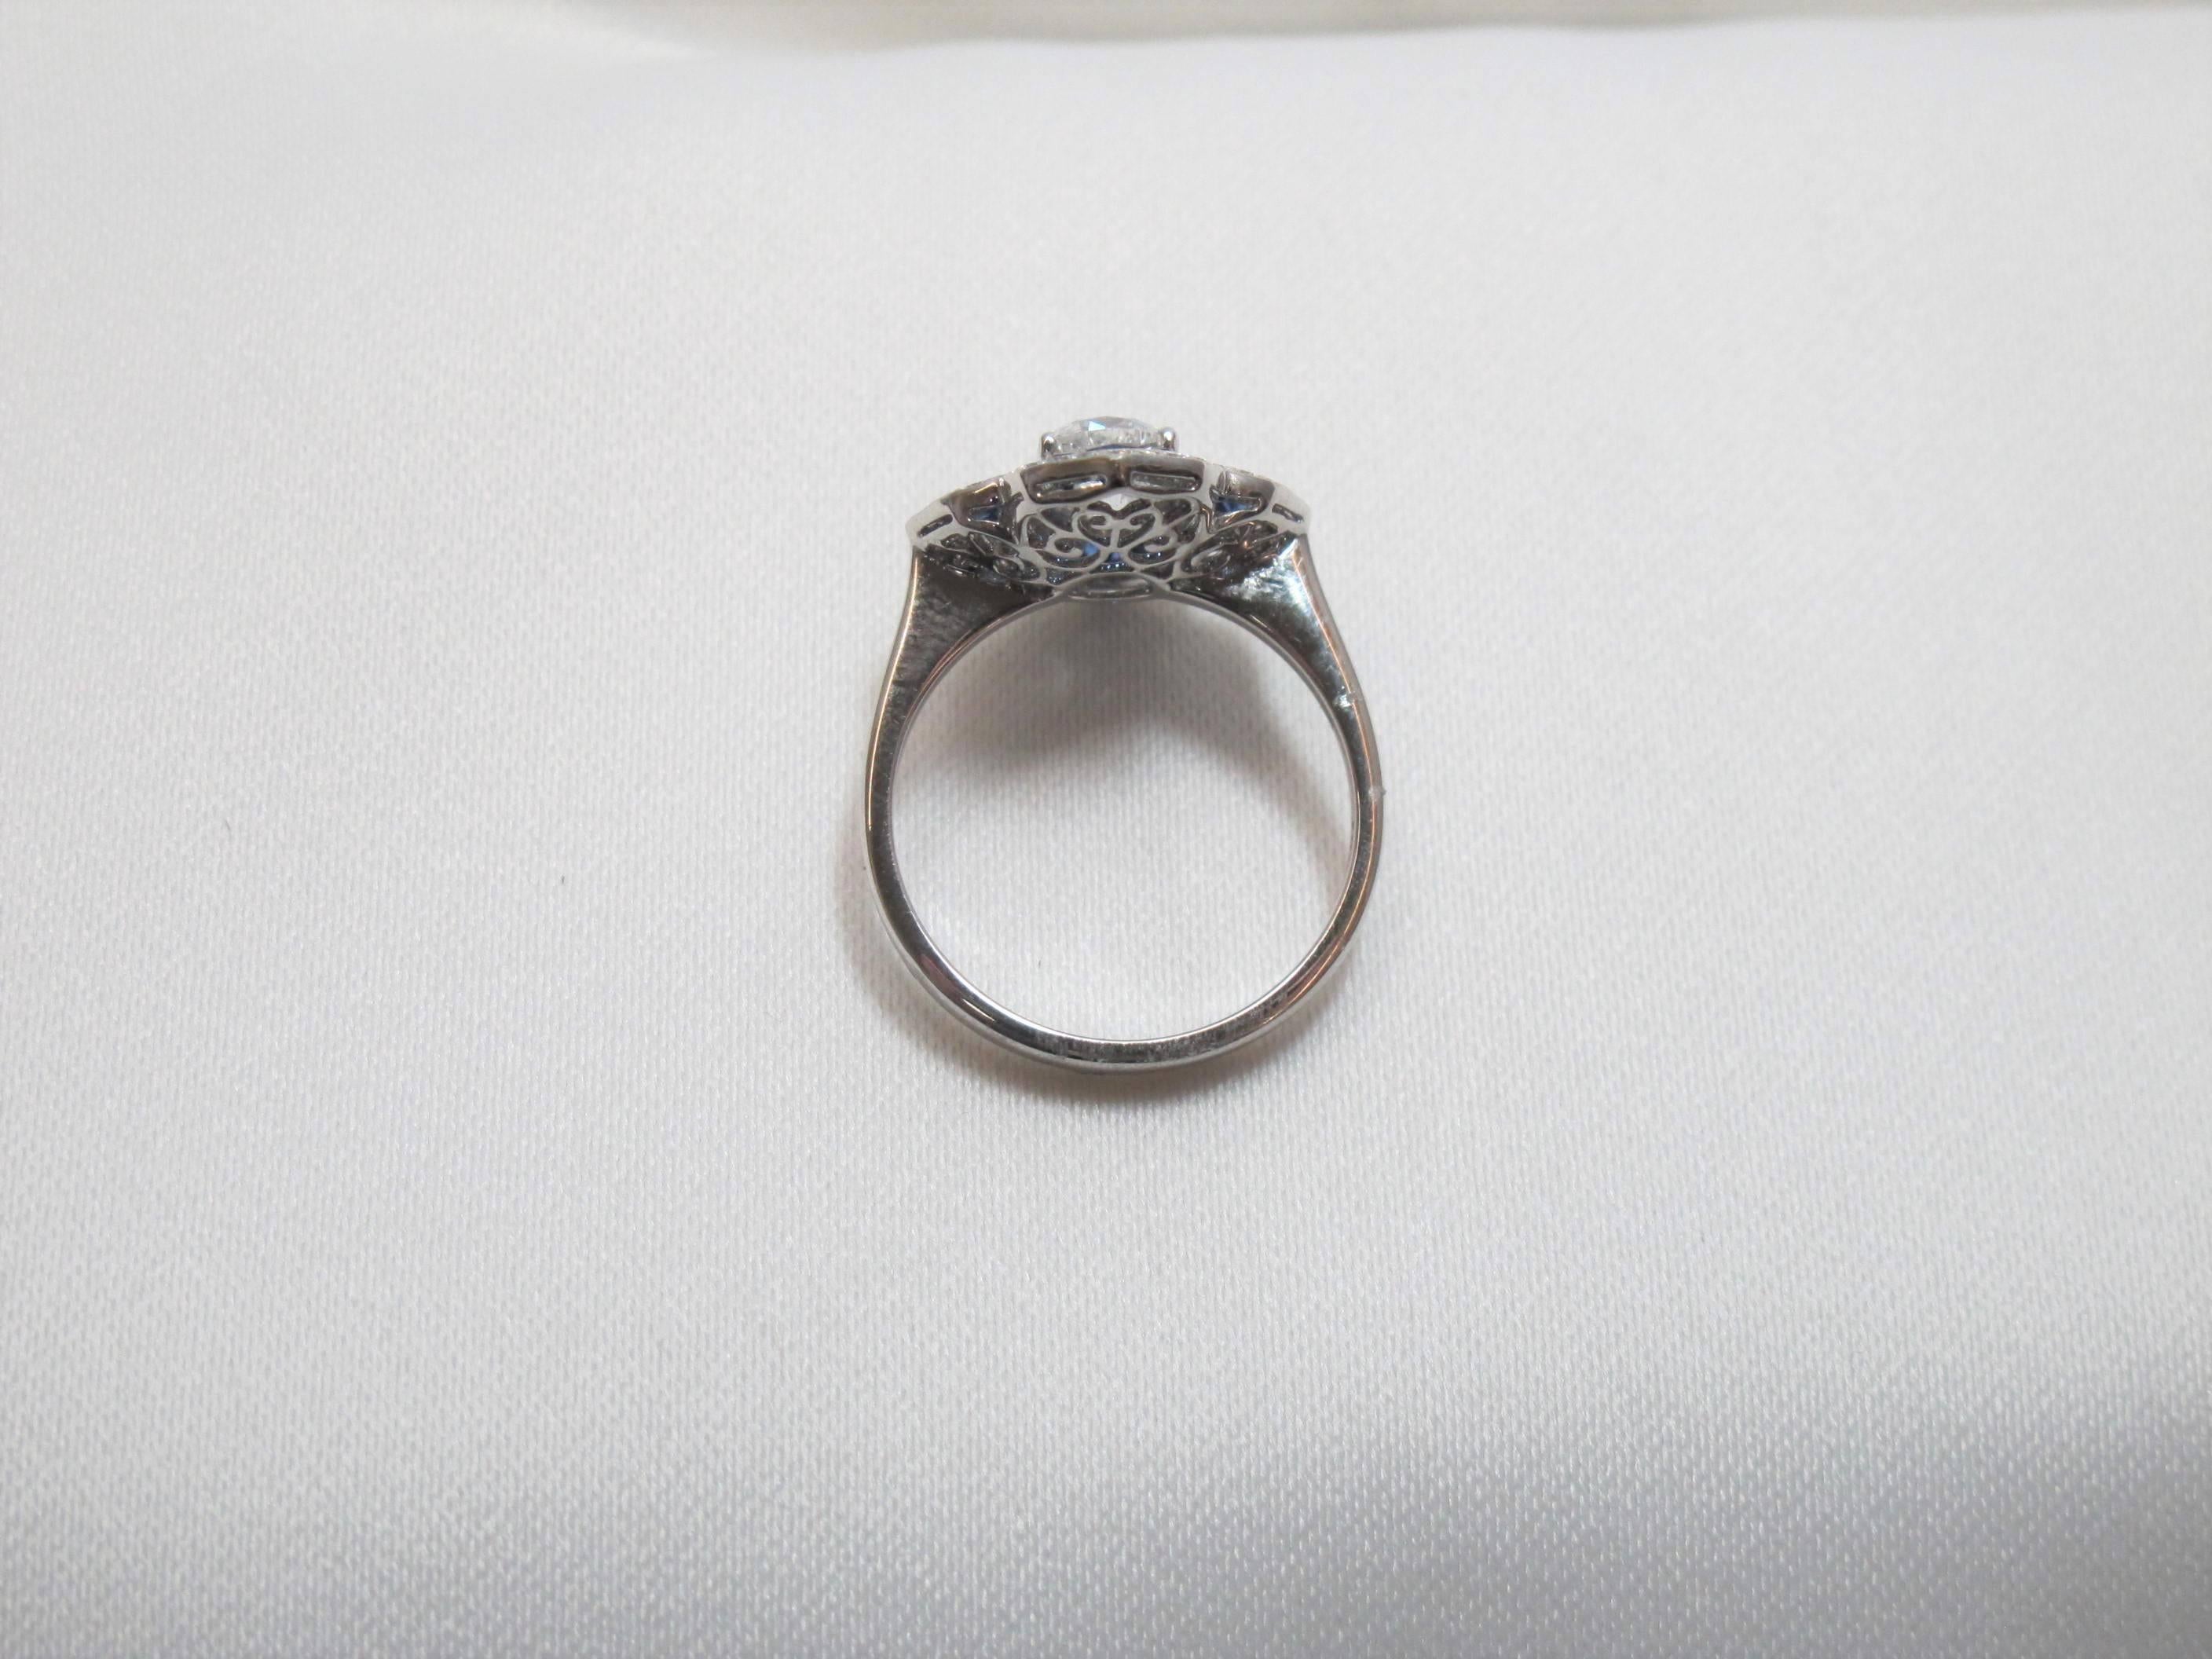 Platinum mounted .92 carats Cushion Cut Diamond ring with .32 carats Sapphires. EGL Certified diamond. Ring is a size 6.5